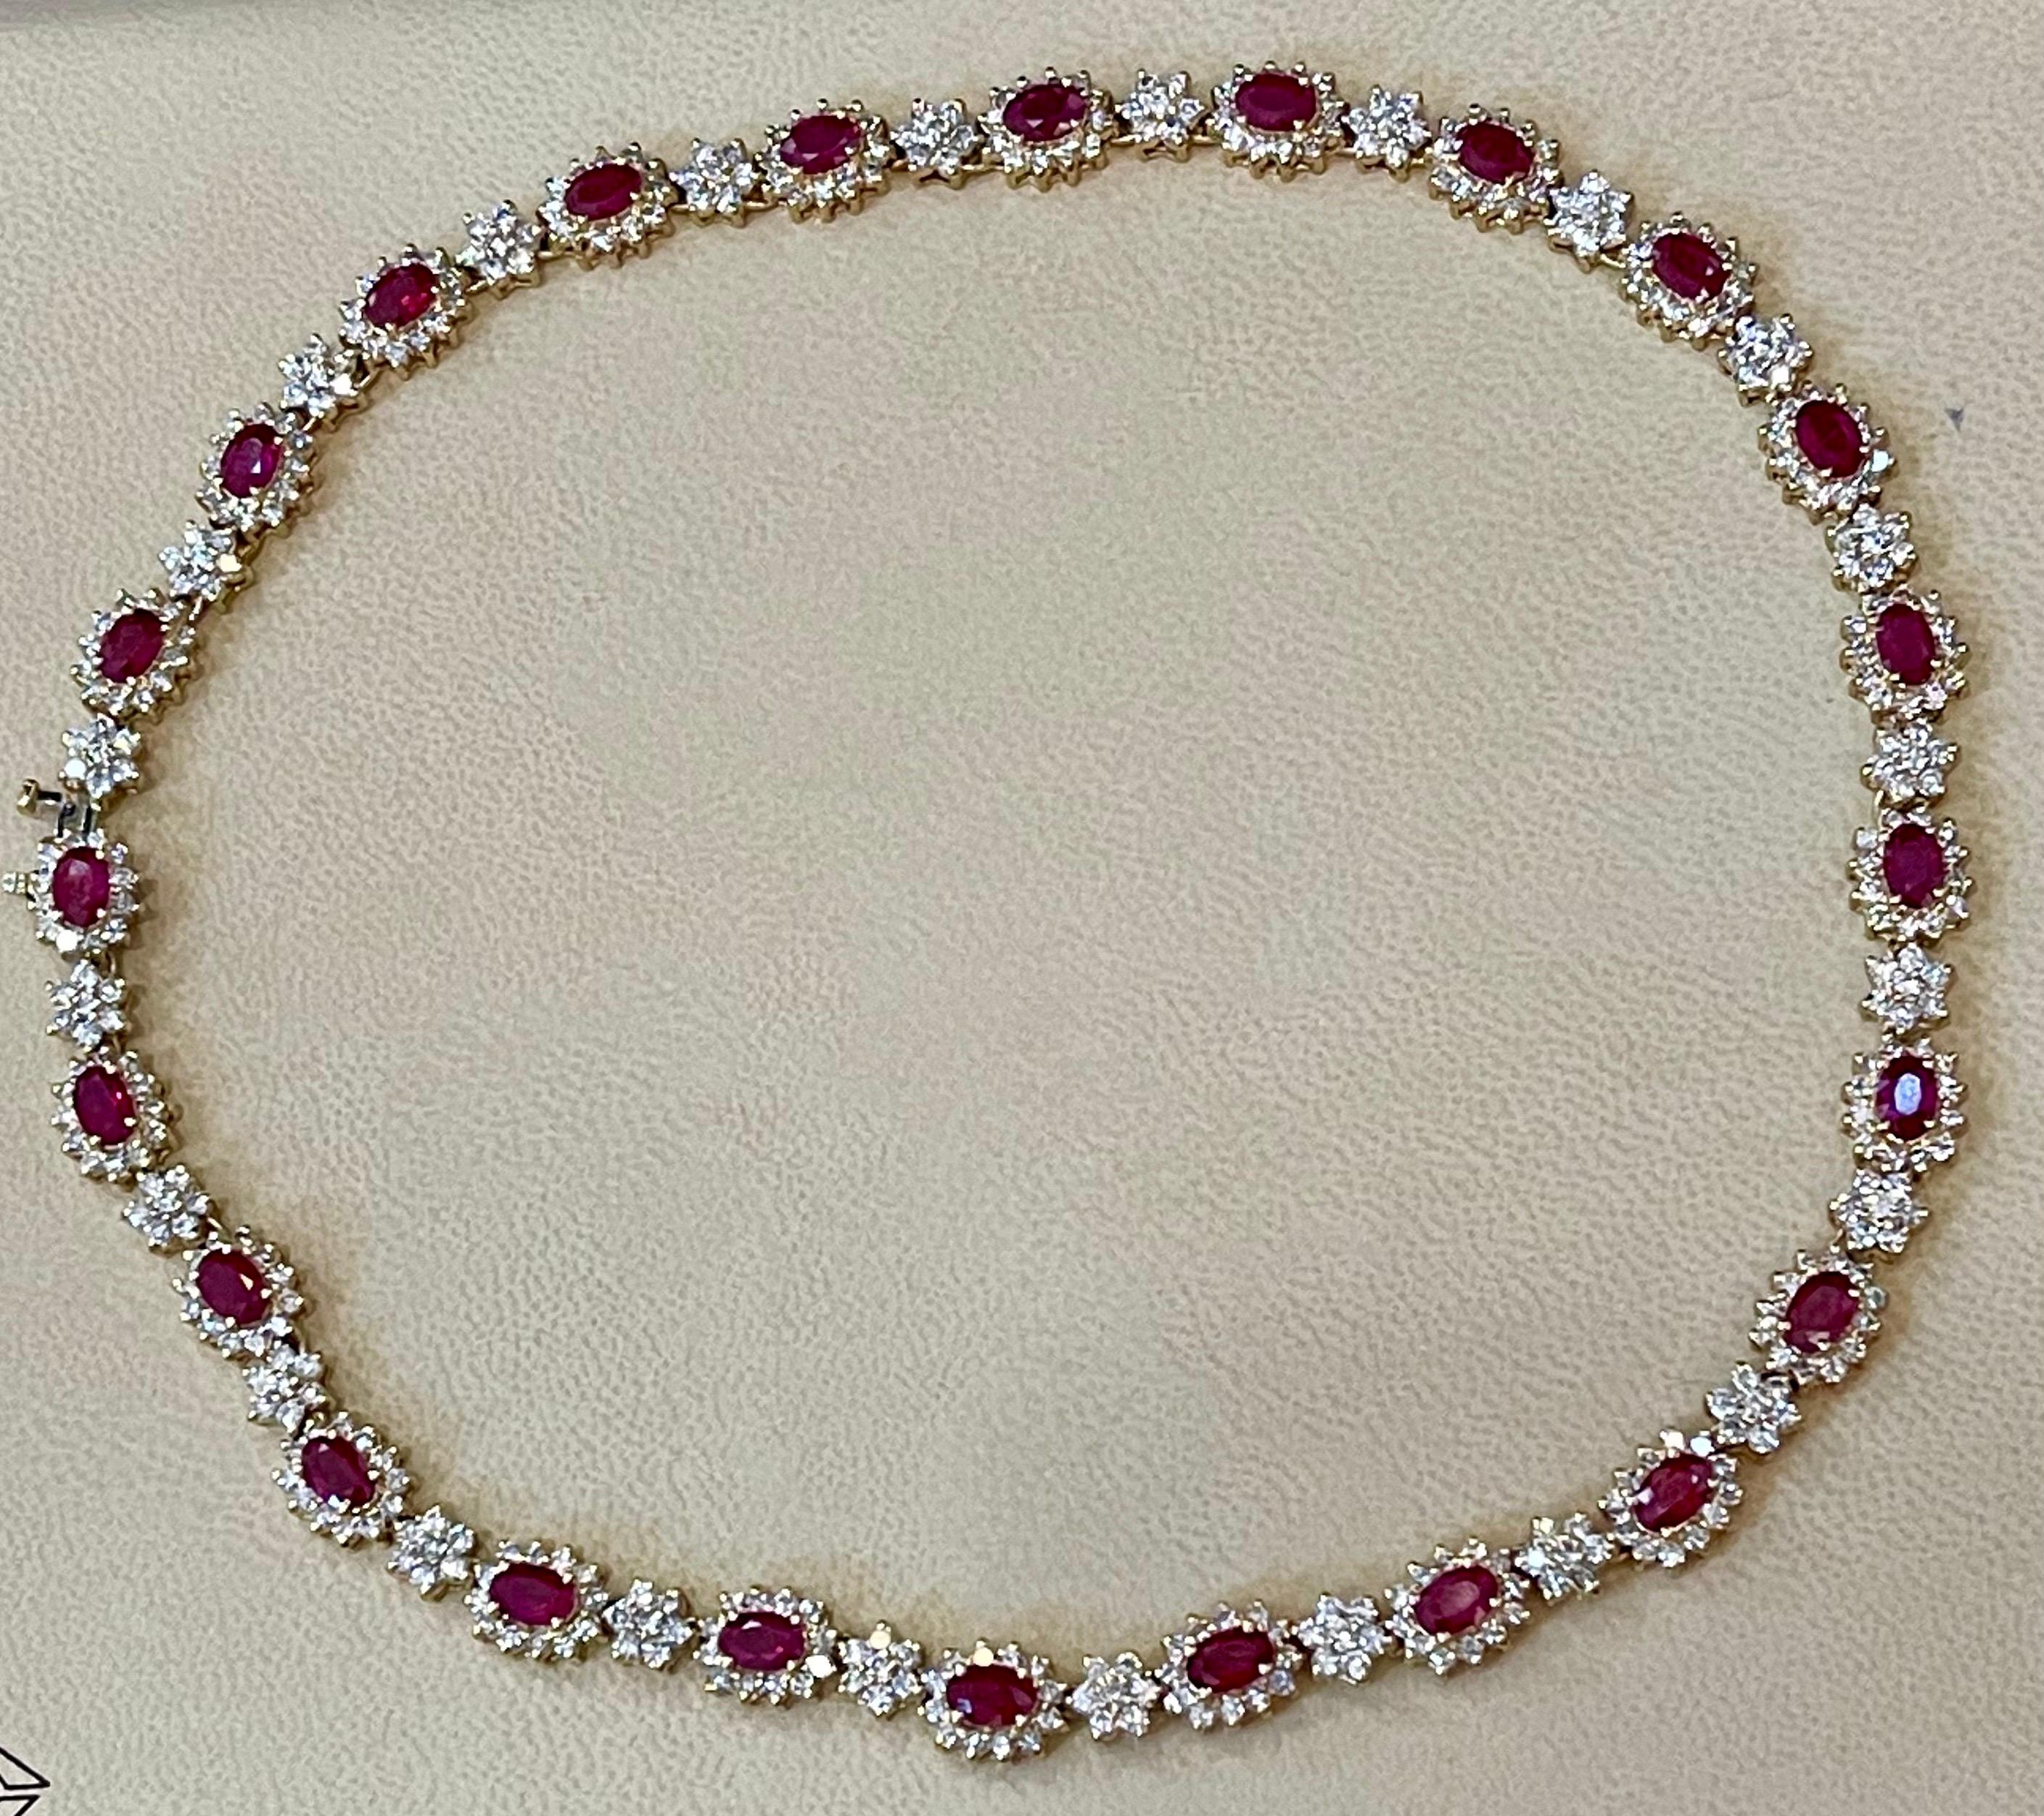 Designer Effy's 14Ct Oval Shape Natural  Ruby & 11 Ct Diamond Necklace 14KY Goldng of 29 stones of Emerald .Each oval 
 Oval shape Ruby is surrounded by brilliant cut diamonds .
The Necklace is made with Brilliant   round cut diamond flowers